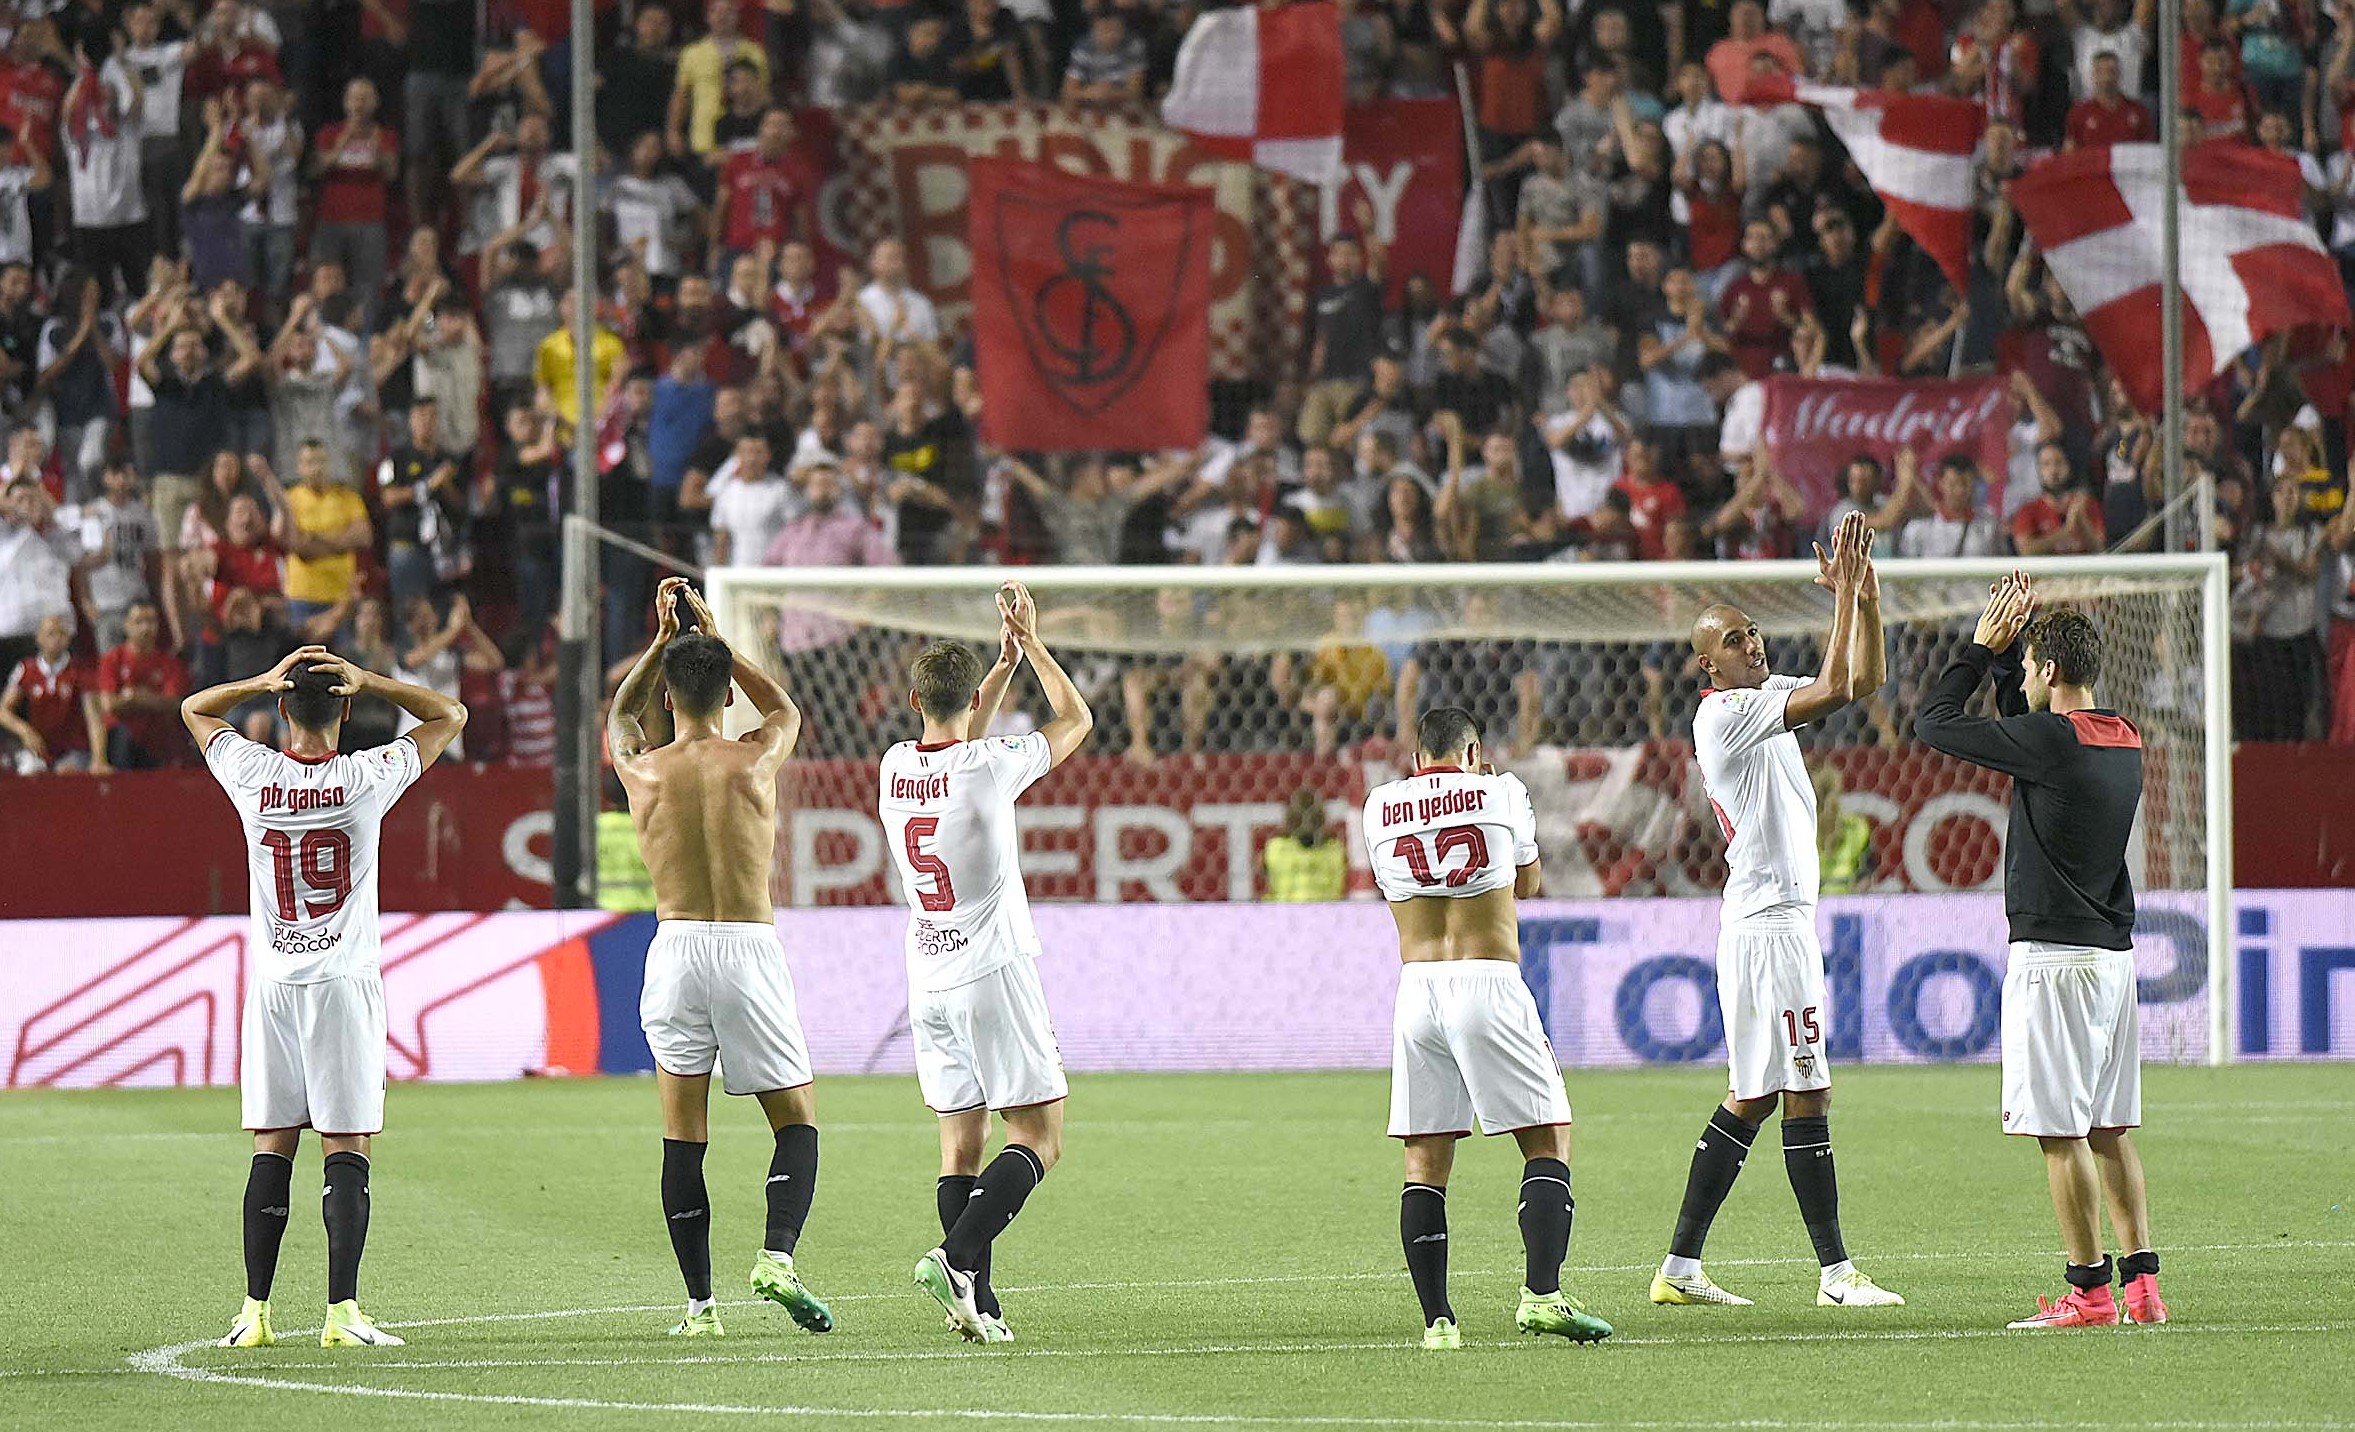 End of the match between Sevilla FC and Osasuna